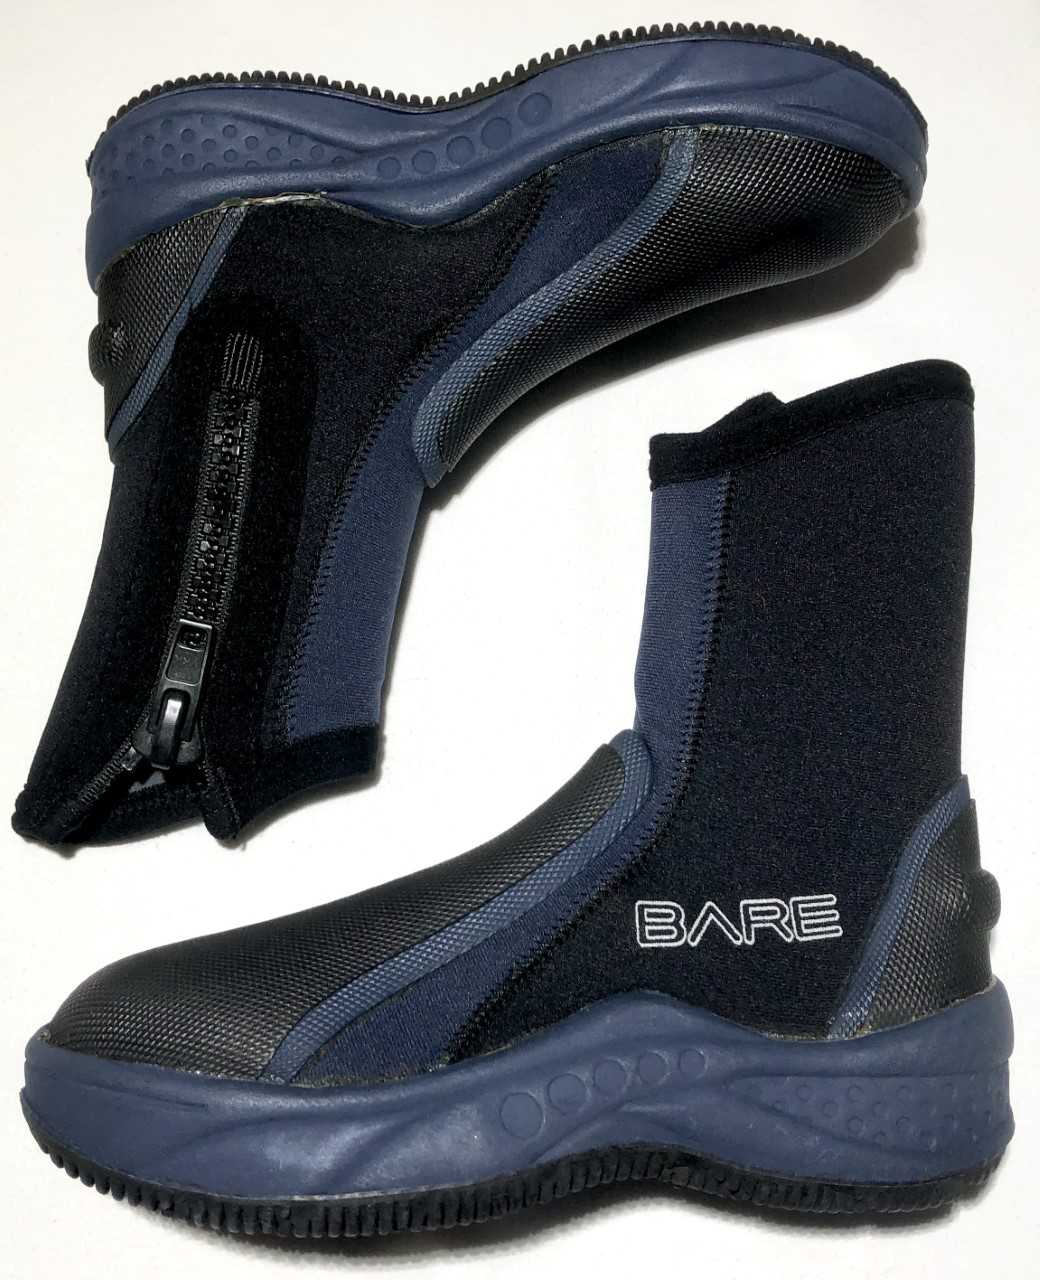 Bare Ice Boots size 4